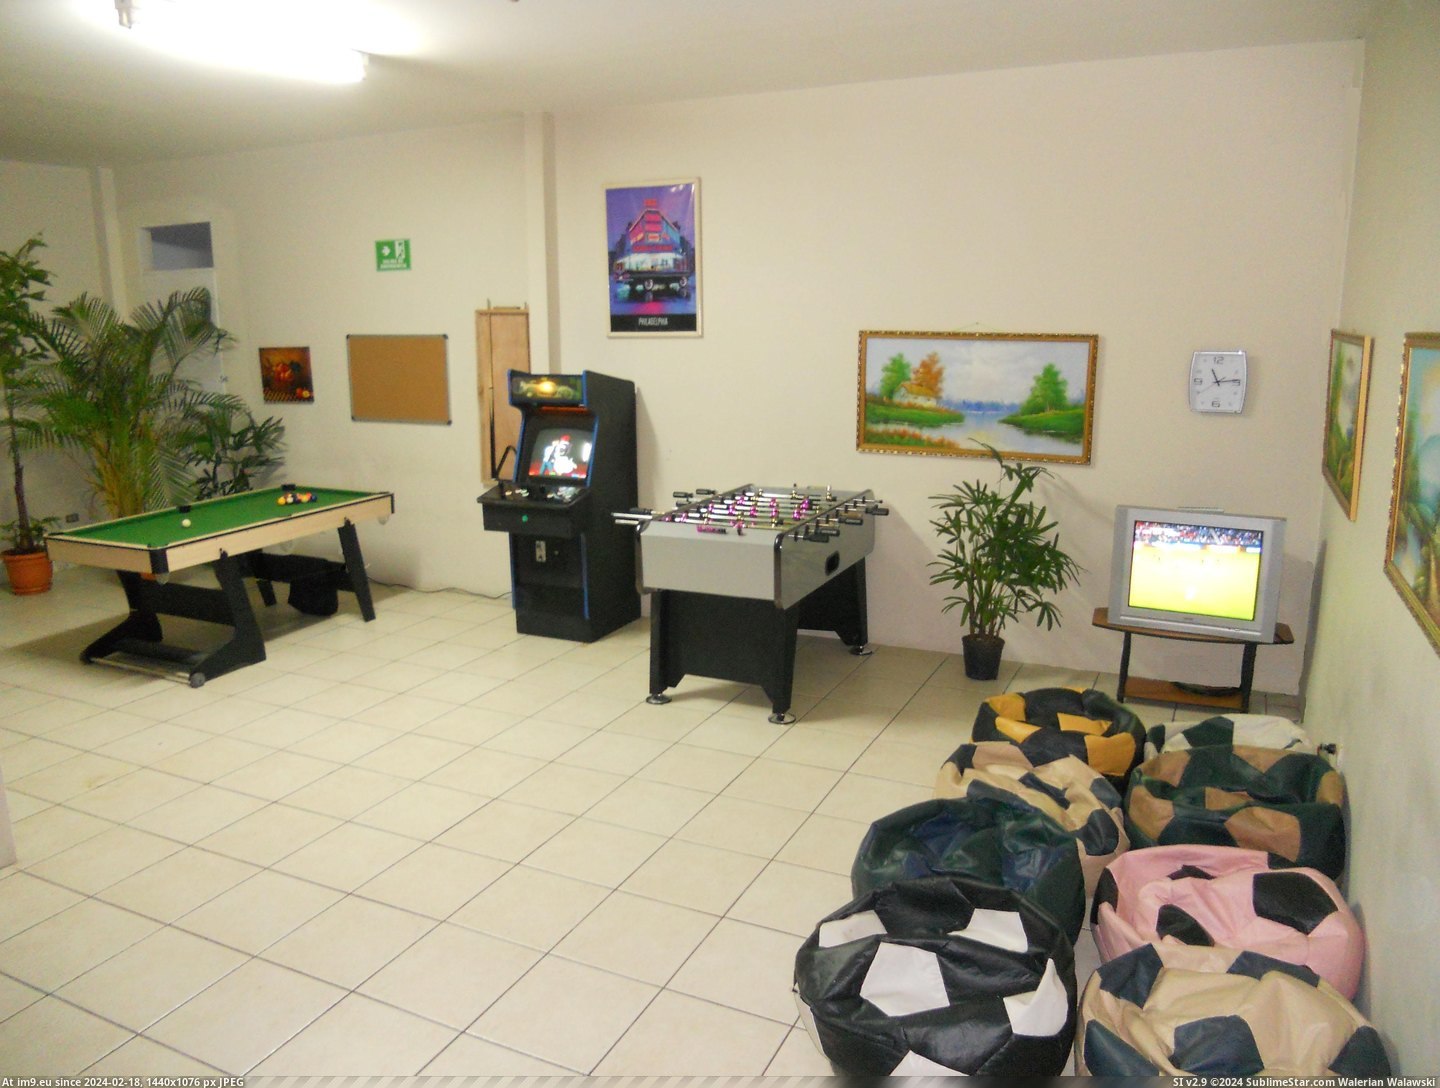 #Game #Designs #Centre #Room CONTACT CENTRE GAME ROOM DESIGNS 2010 Pic. (Obraz z album BEST BOSS SUPPORTS EMPLOYEE GAME ROOM VIDEO ARCADE))